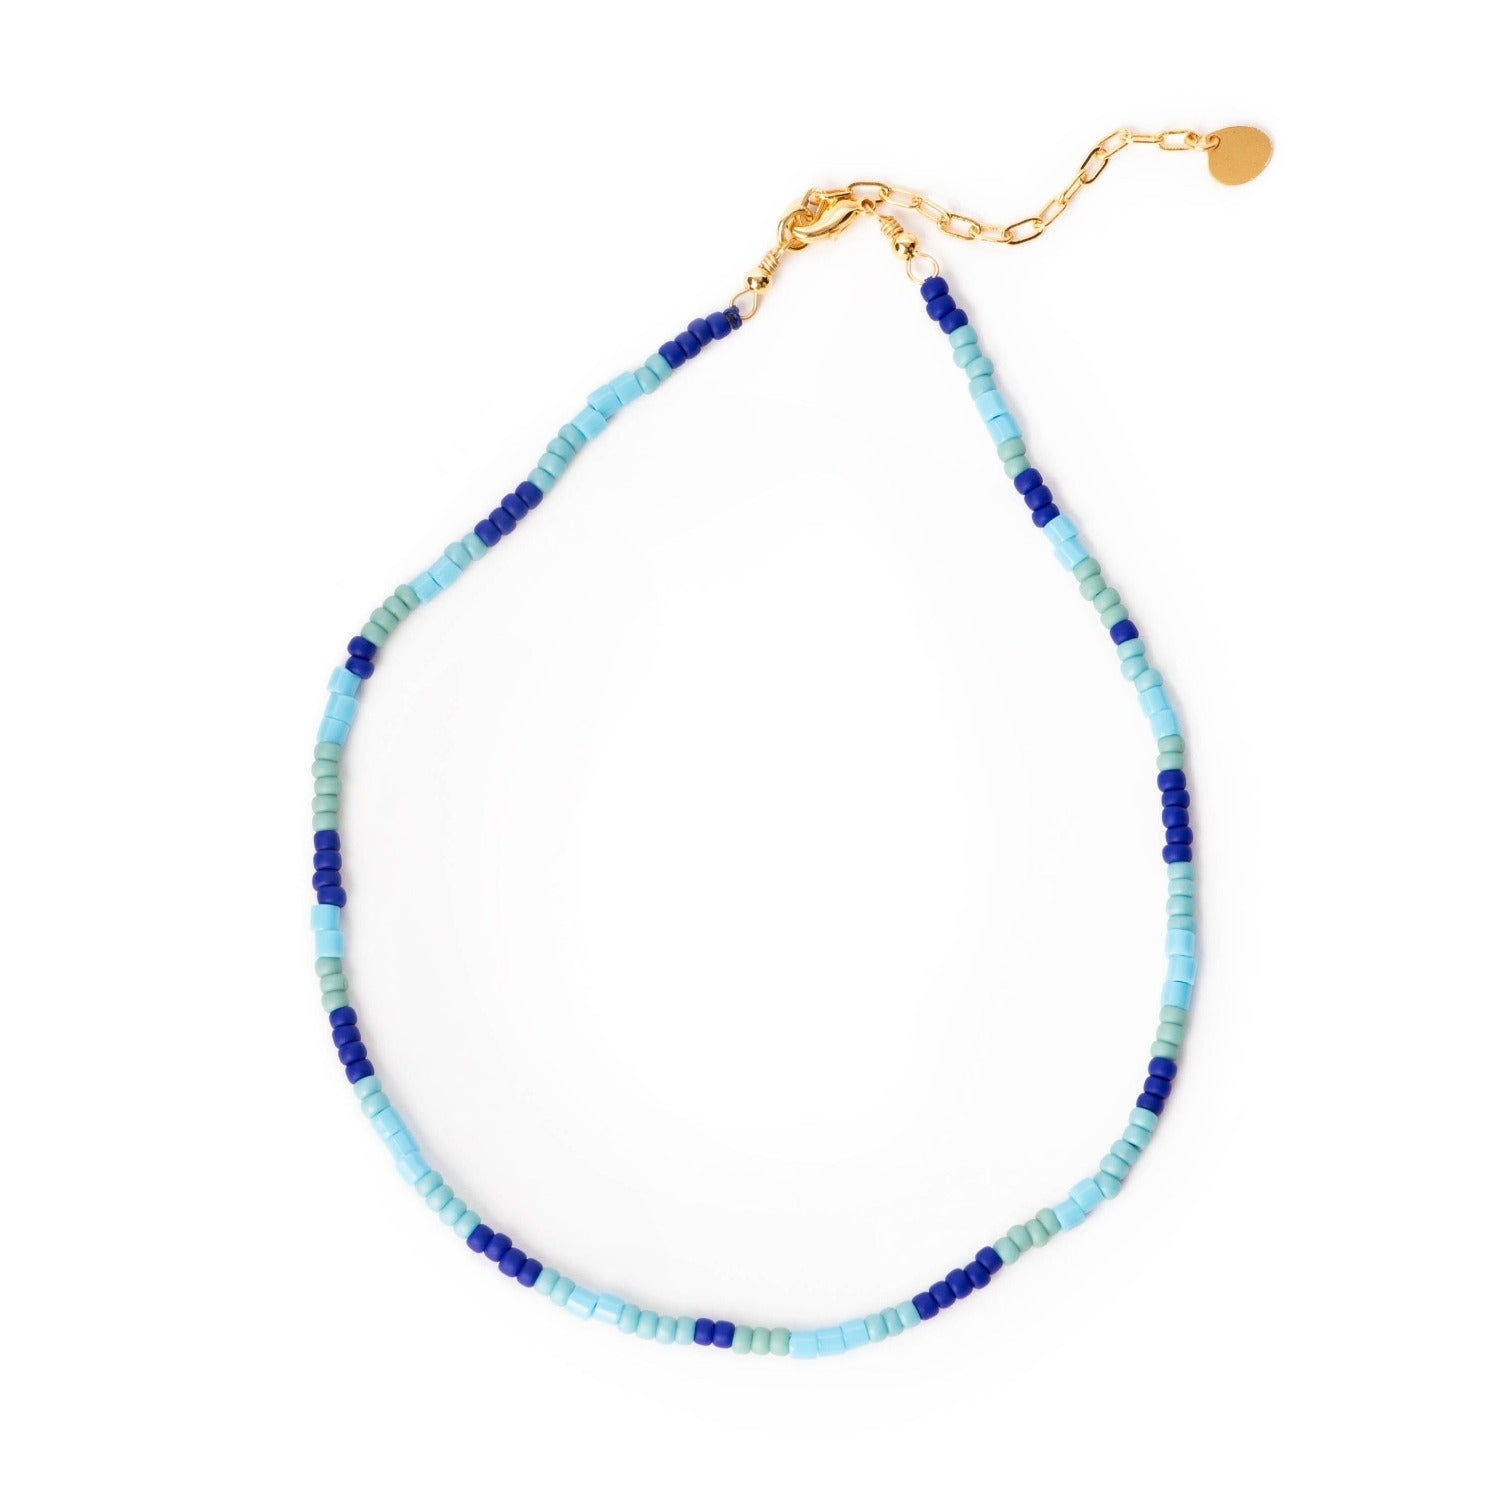 Contrasting blue beaded necklace